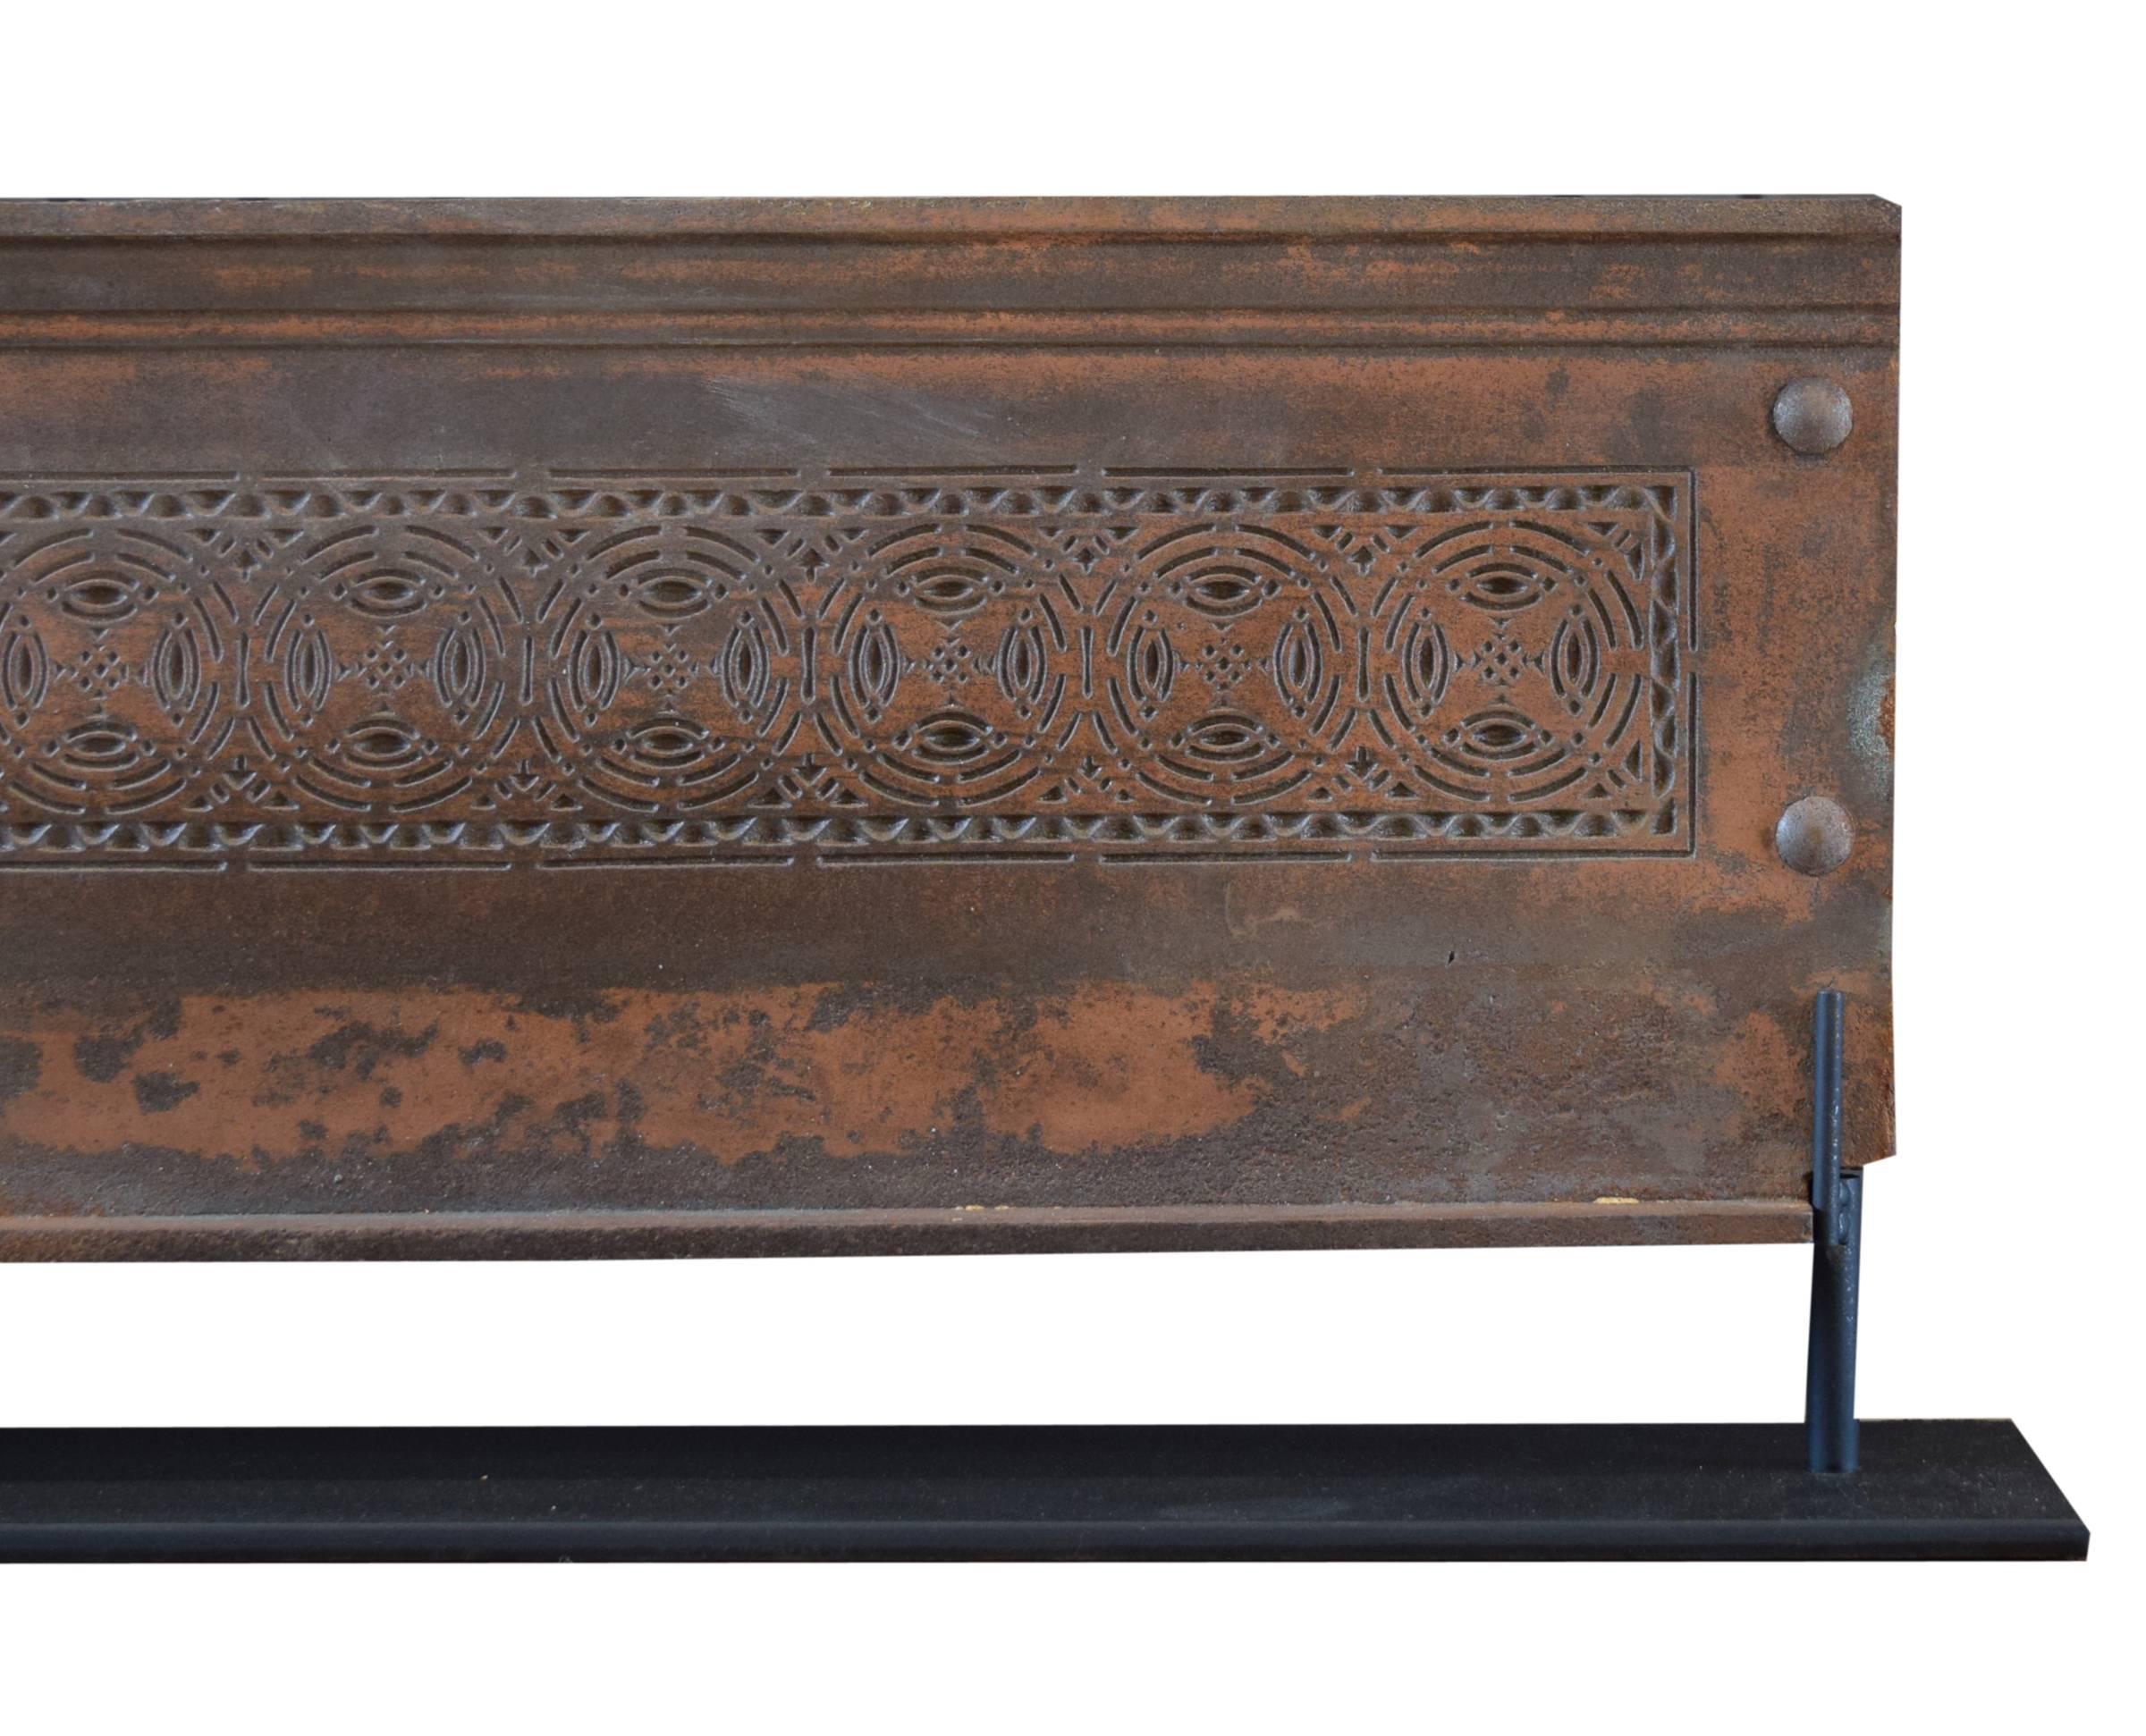 A copper over iron stair riser from the Chicago Stock Exchange by Adler and Sullivan, 1983-1984. This intricate piece was designed by Sullivan and fabricated by the Winslow Brothers Foundry in Chicago. It sits on a custom steel mount.